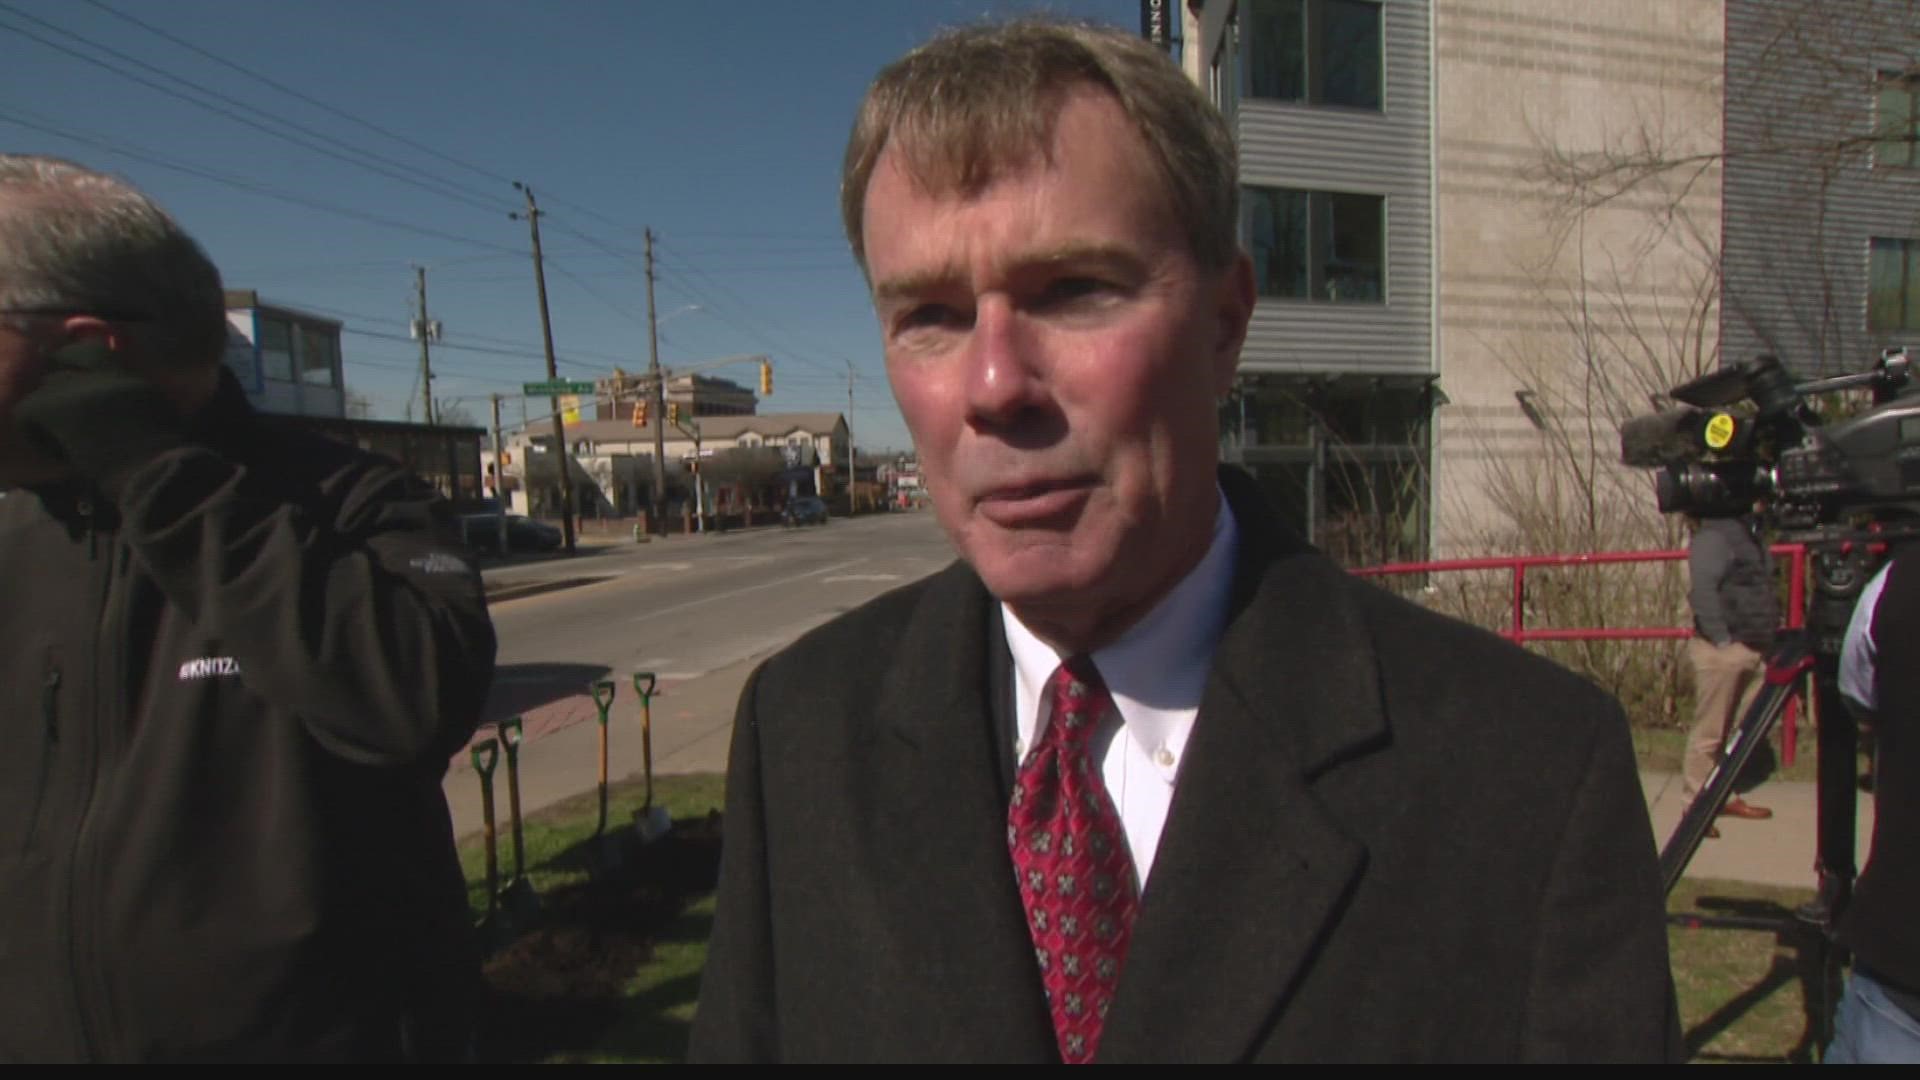 Mayor Hogsett outlined long-needed road and drainage improvements for Broad Ripple Avenue and Broad Ripple Village.